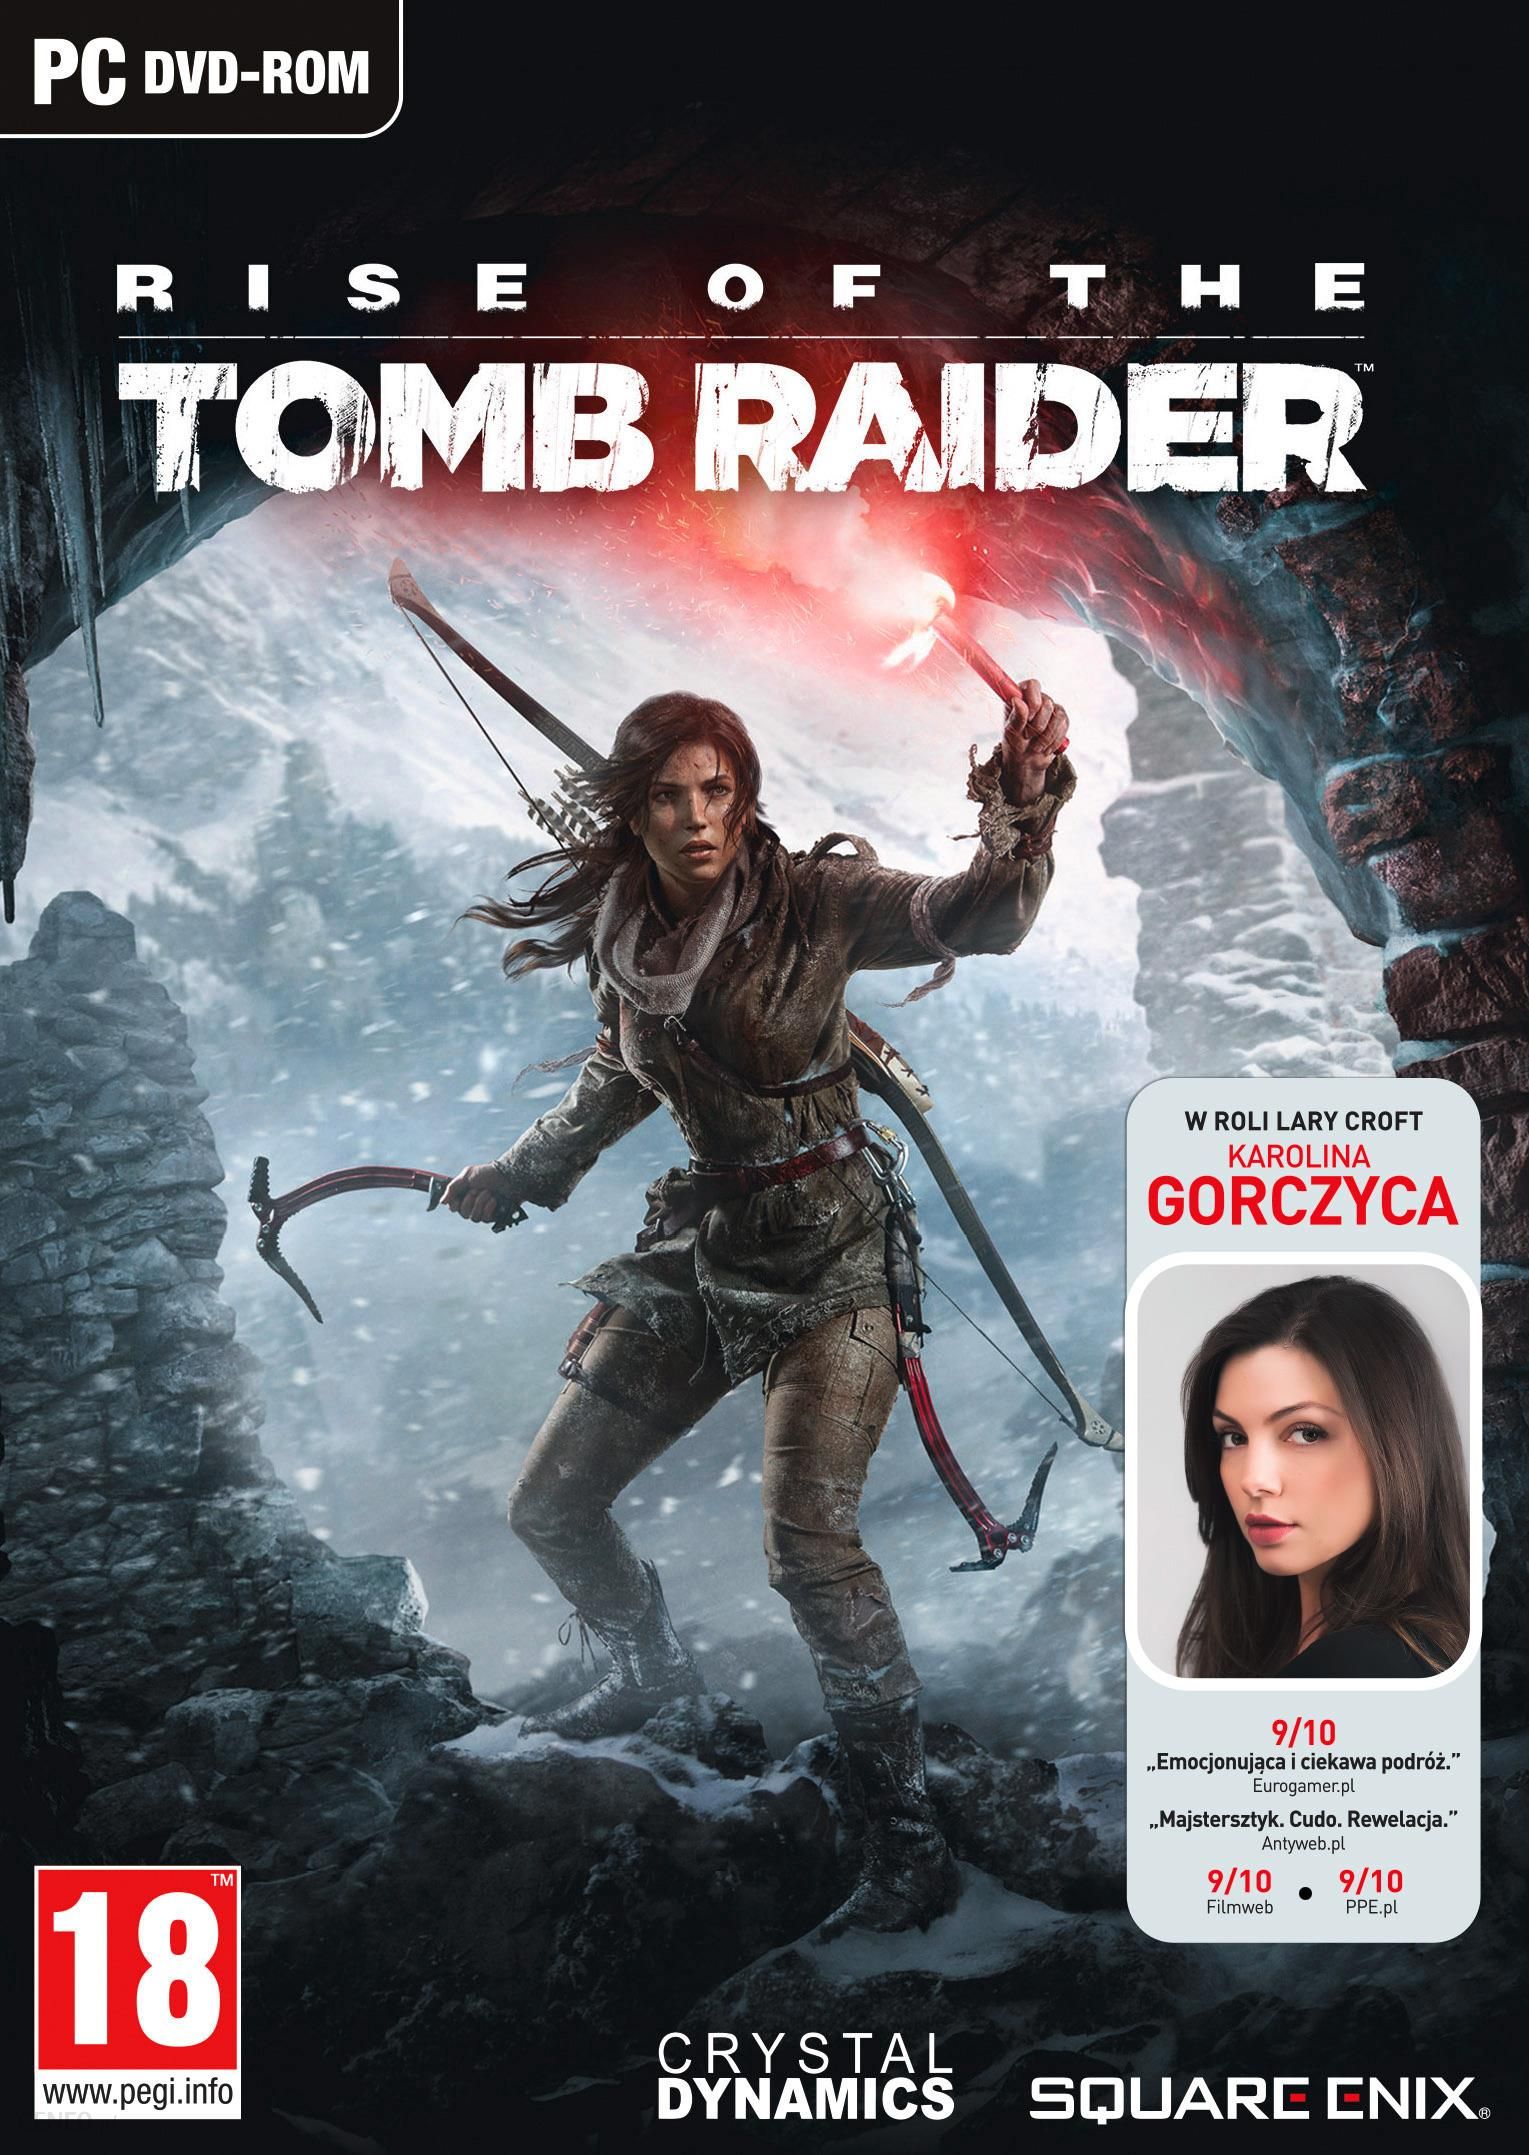 rise of the tomb raider currency trainer